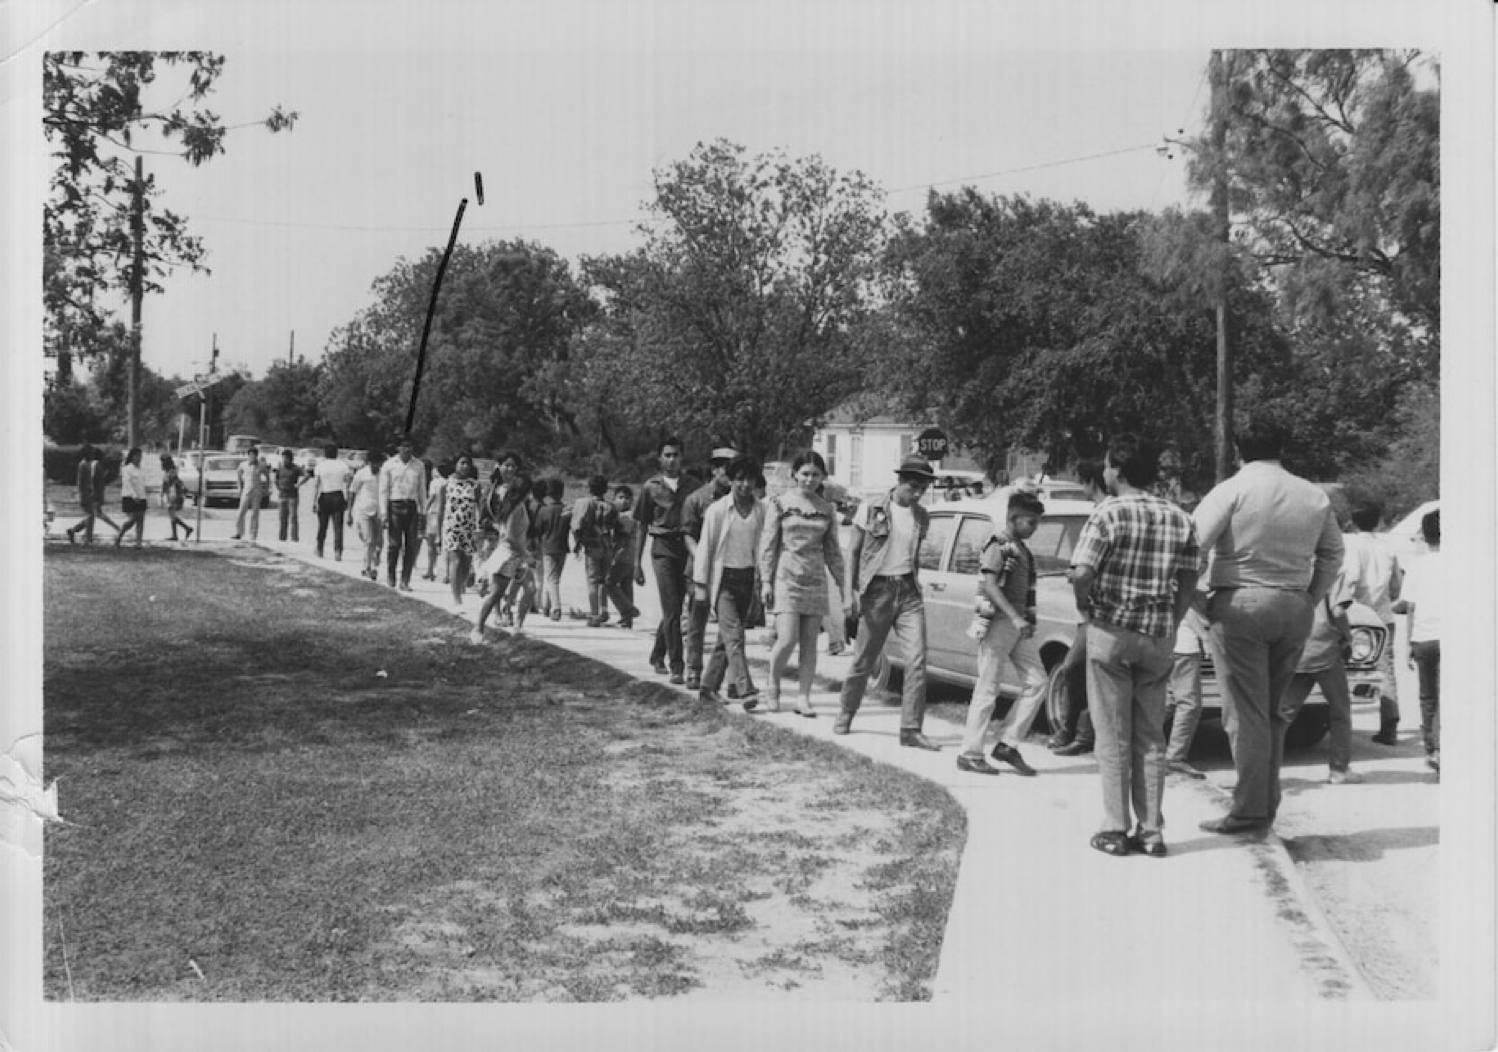 Students leave Robb Elementary in Uvalde during the 1970 walkout. (Alfredo Santos/Voces Oral History Center, University of Texas at Austin)